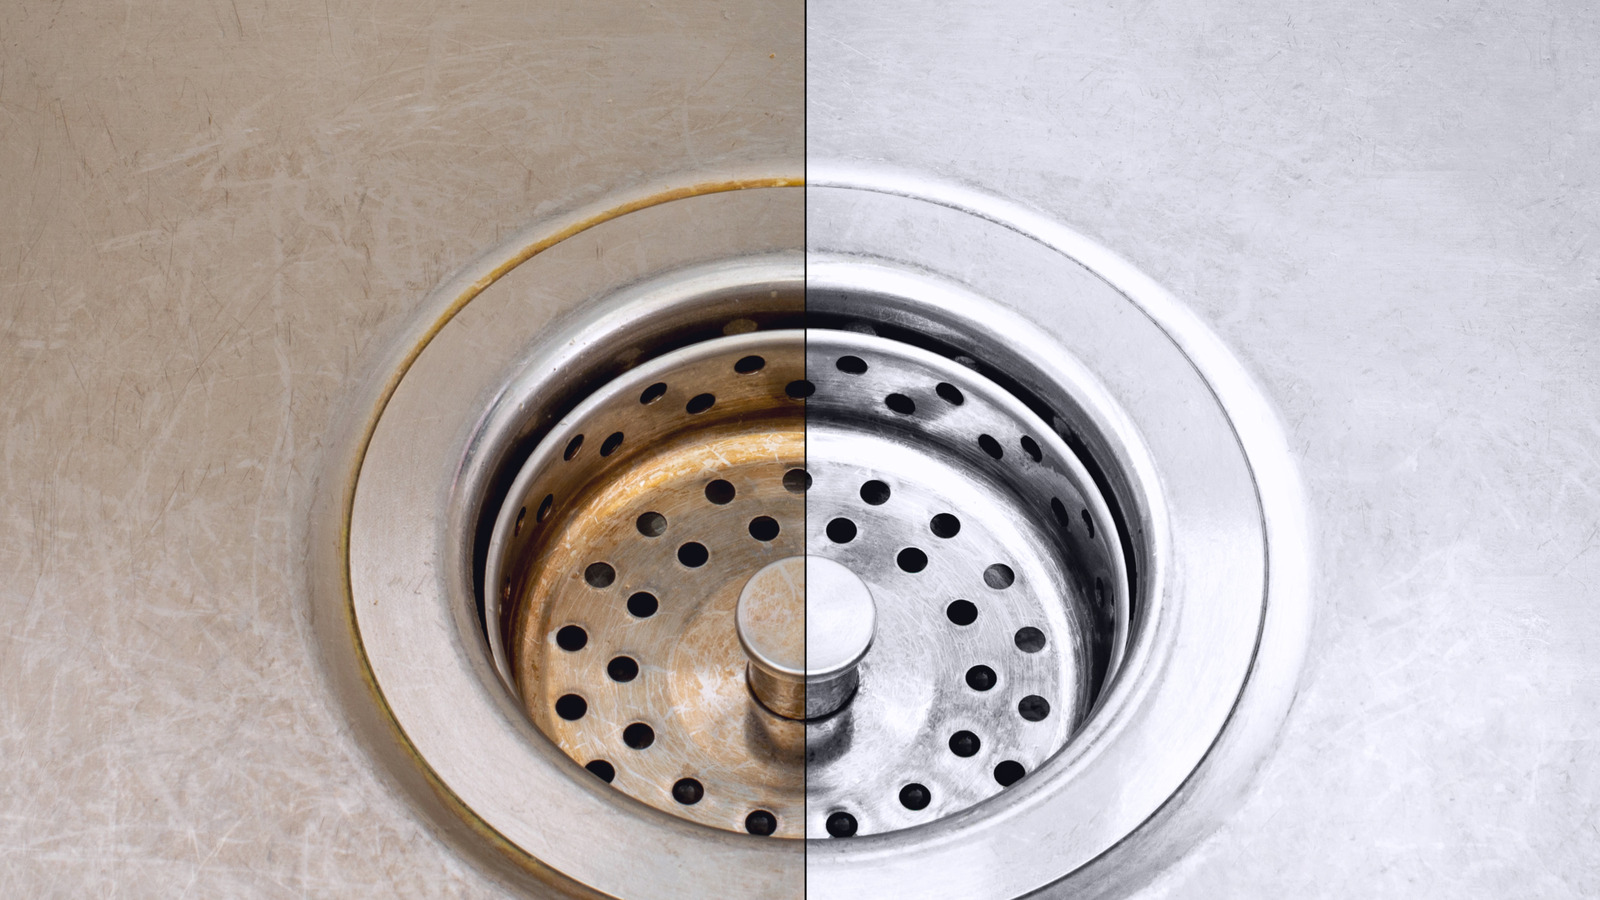 https://www.housedigest.com/img/gallery/how-to-keep-your-stainless-steel-sink-in-pristine-condition/l-intro-1643138031.jpg